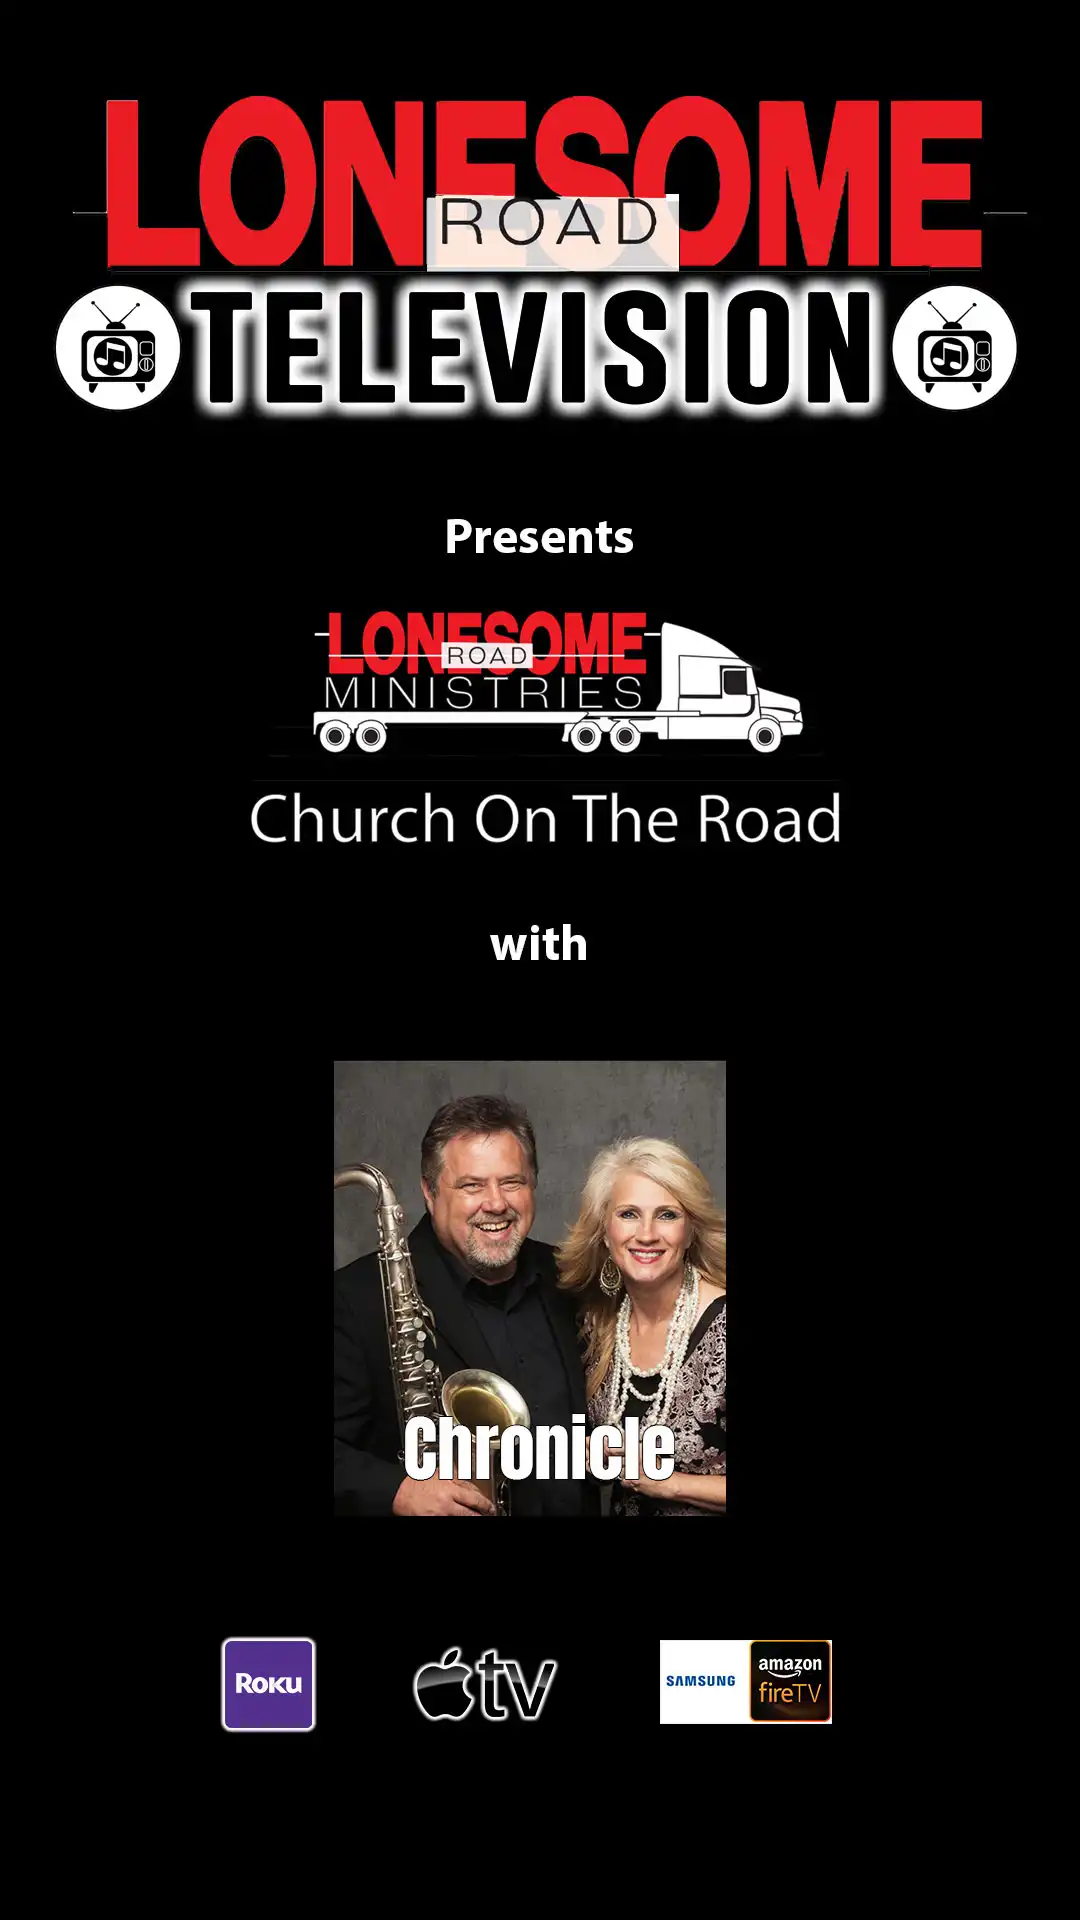 Church On The Road with Chronicle